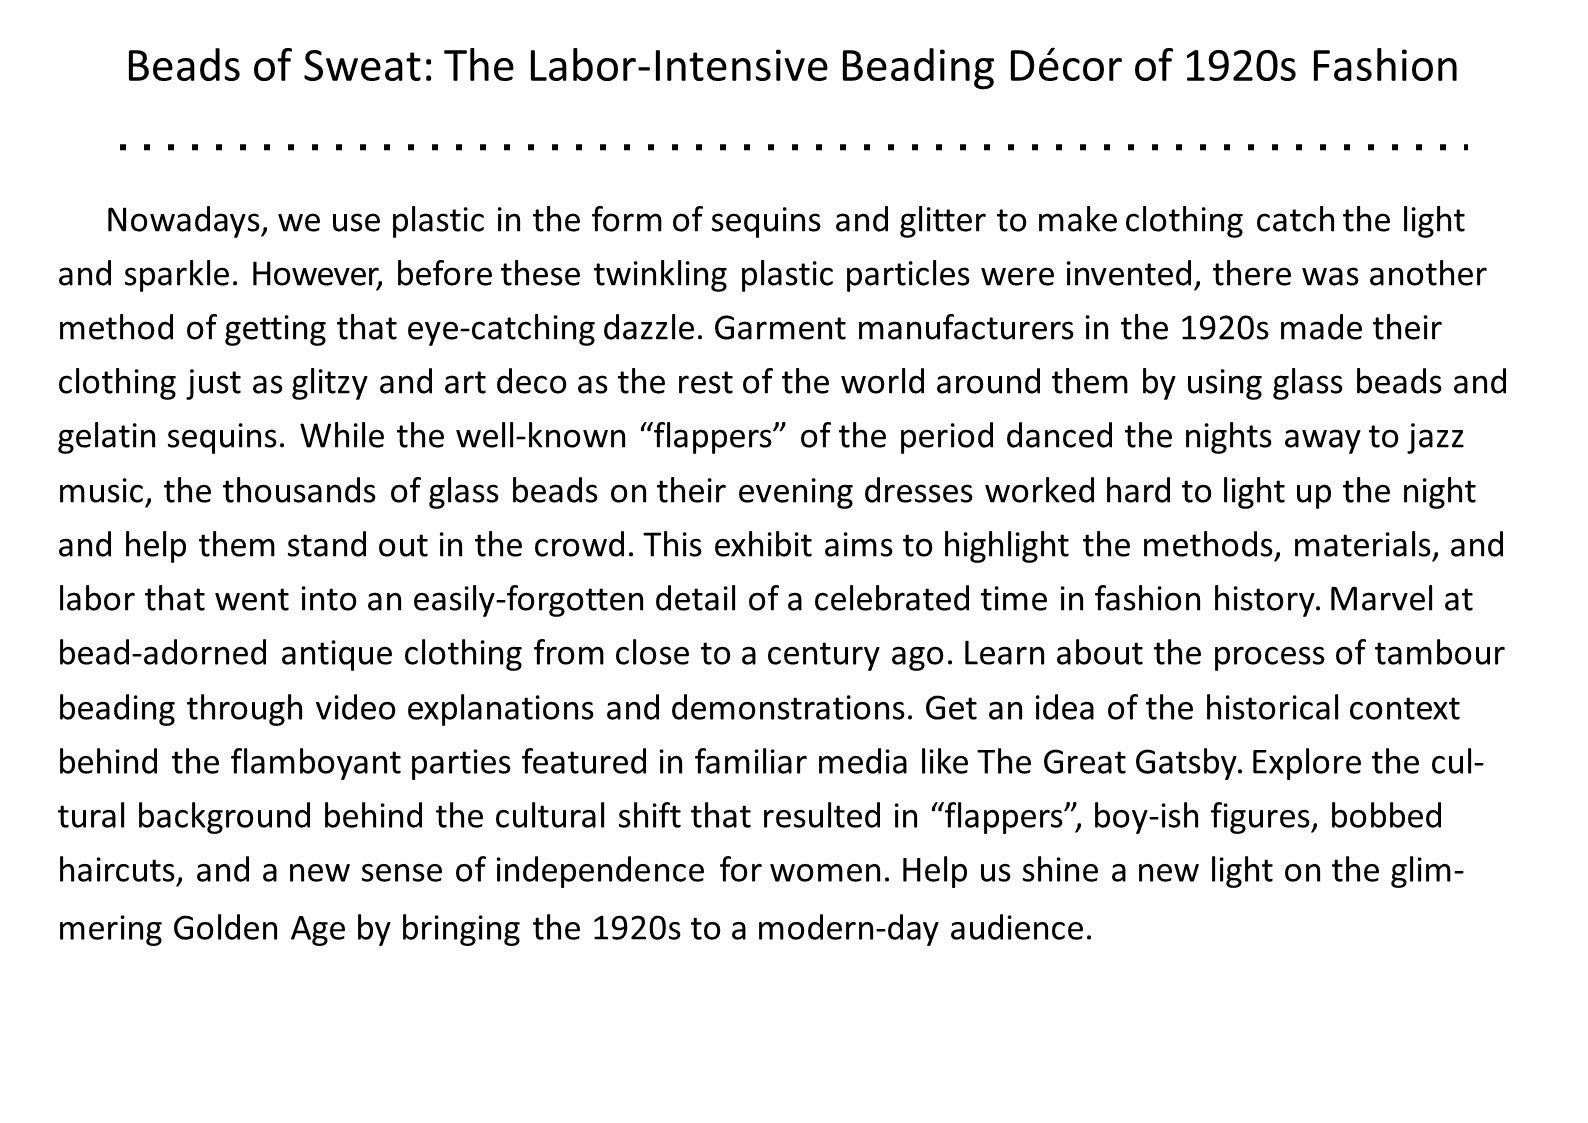 Beads of Sweat: The Labor-Intensive Beading Decor of 1920s Fashion